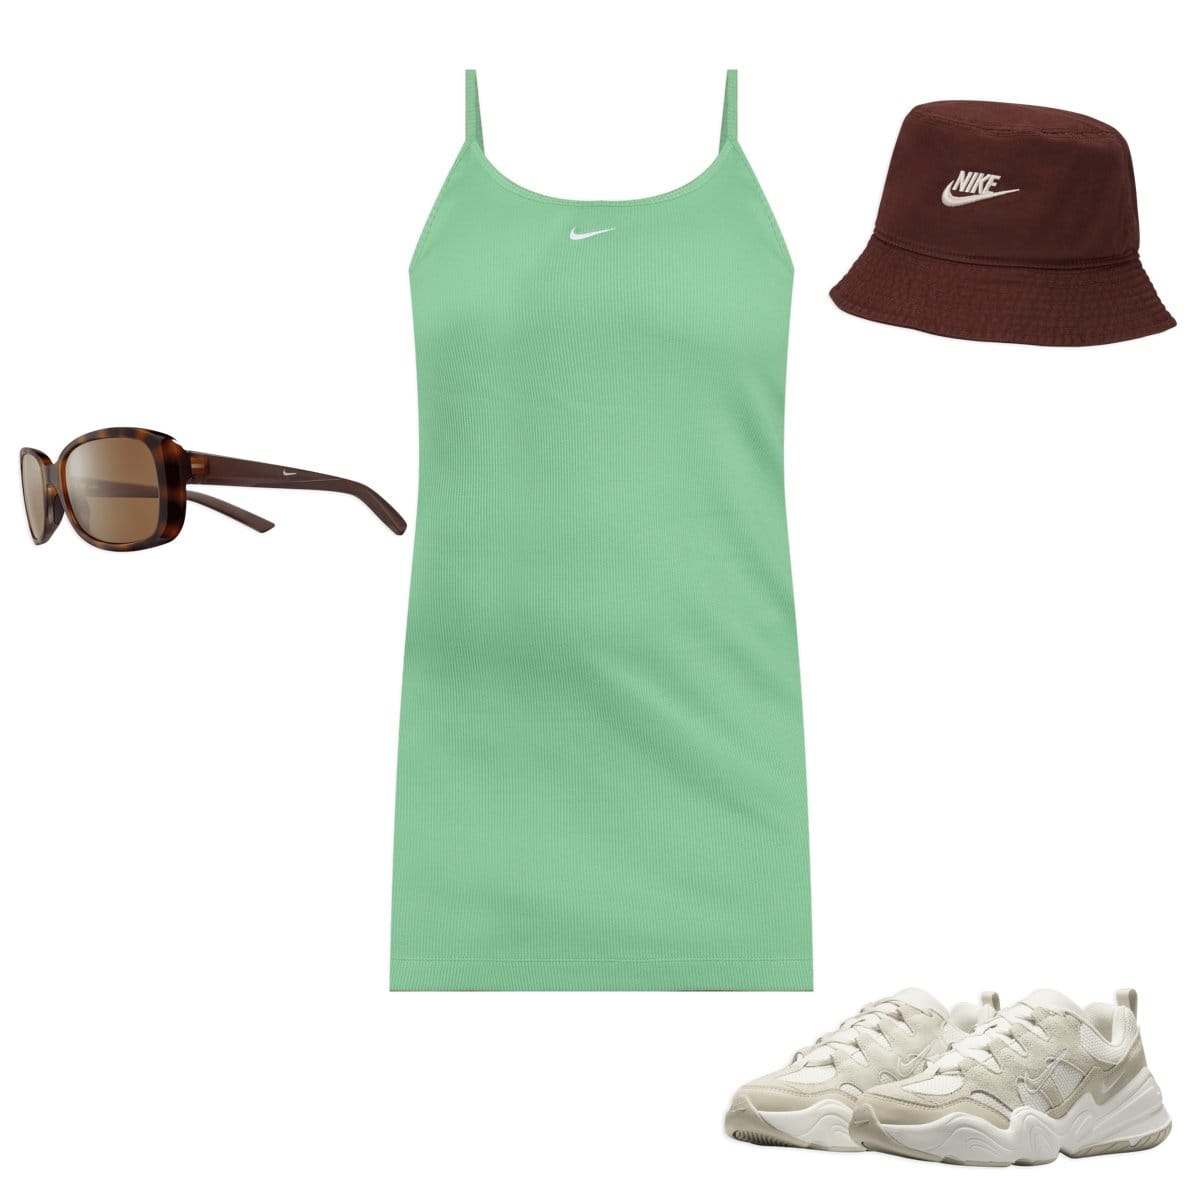 What To Wear to a Baseball Game: 5 Outfit Ideas You're Sure To Love.